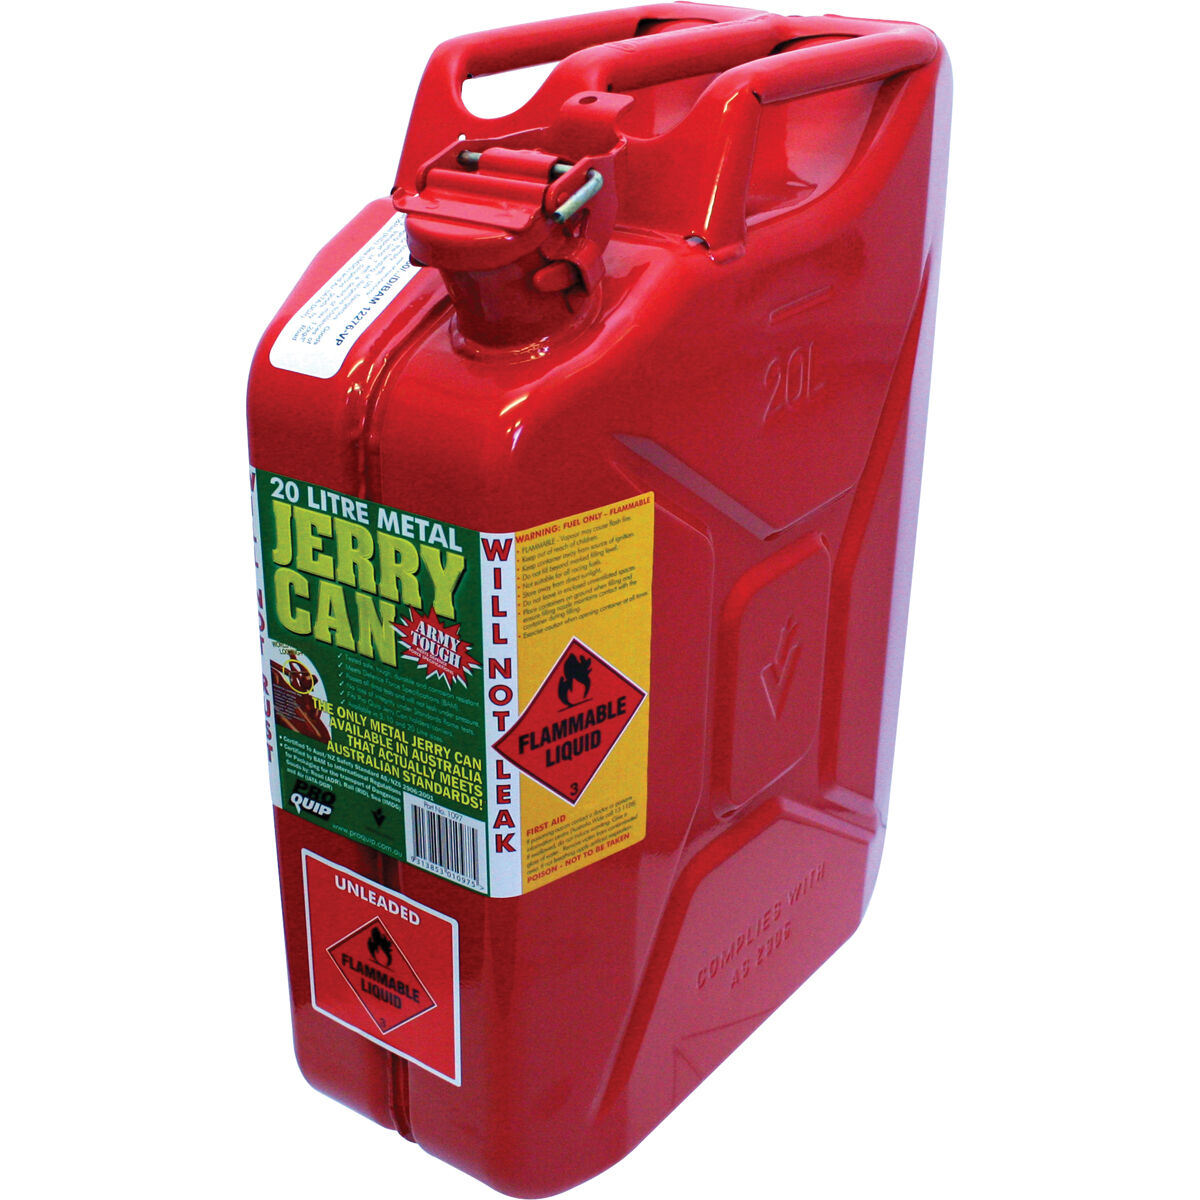 Metal Jerry Can - Petrol, 20 Litre